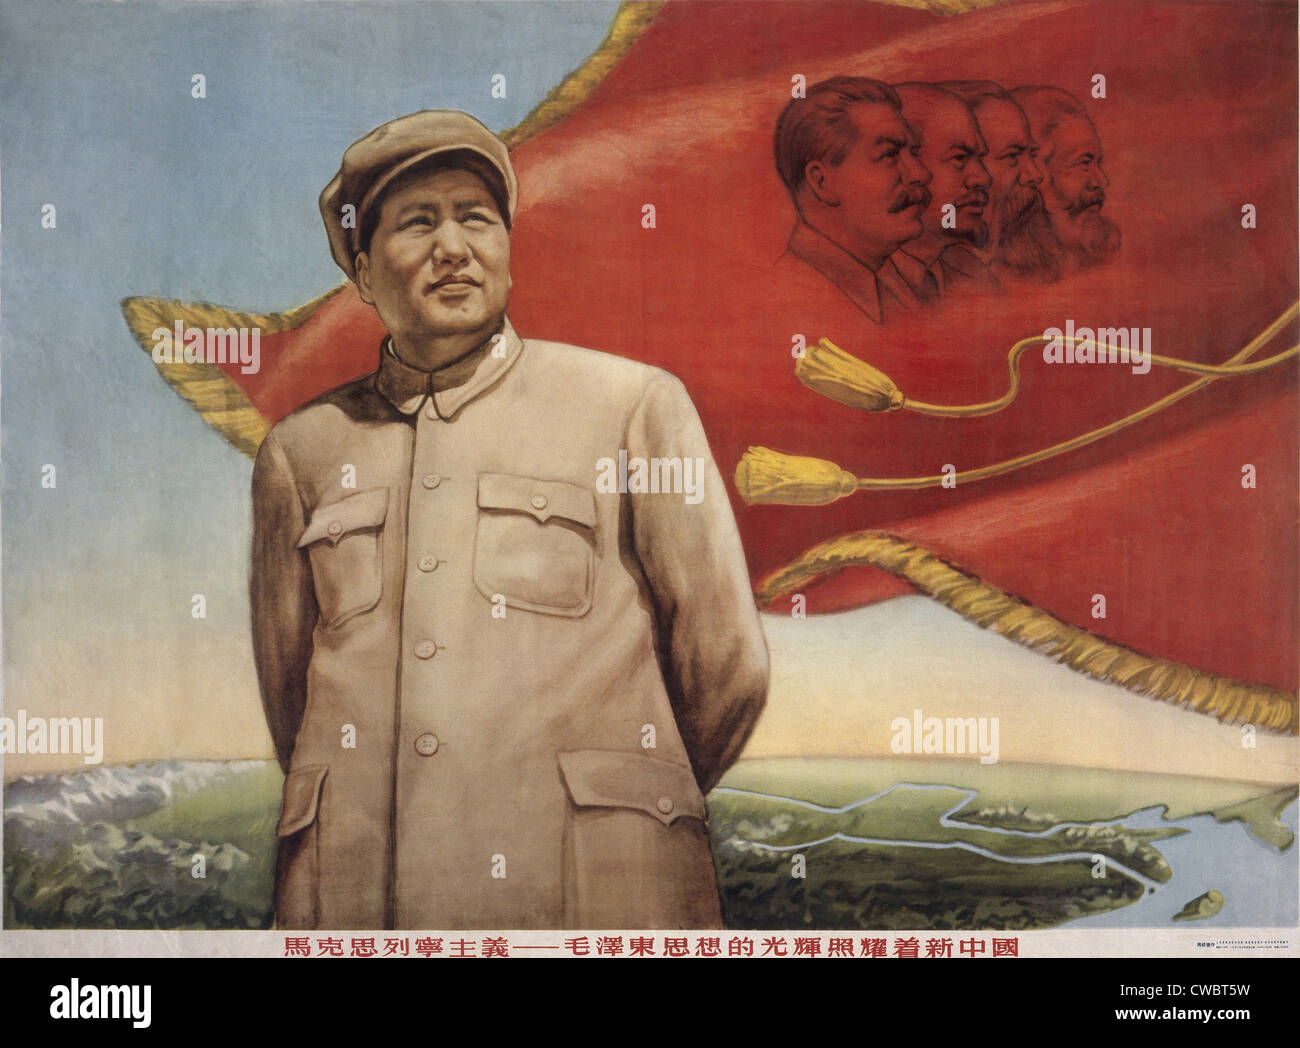 The glory of Mao's ideologies brightens up the new China. Poster shows Mao Zedong standing in front of red flag with portraits Stock Photo